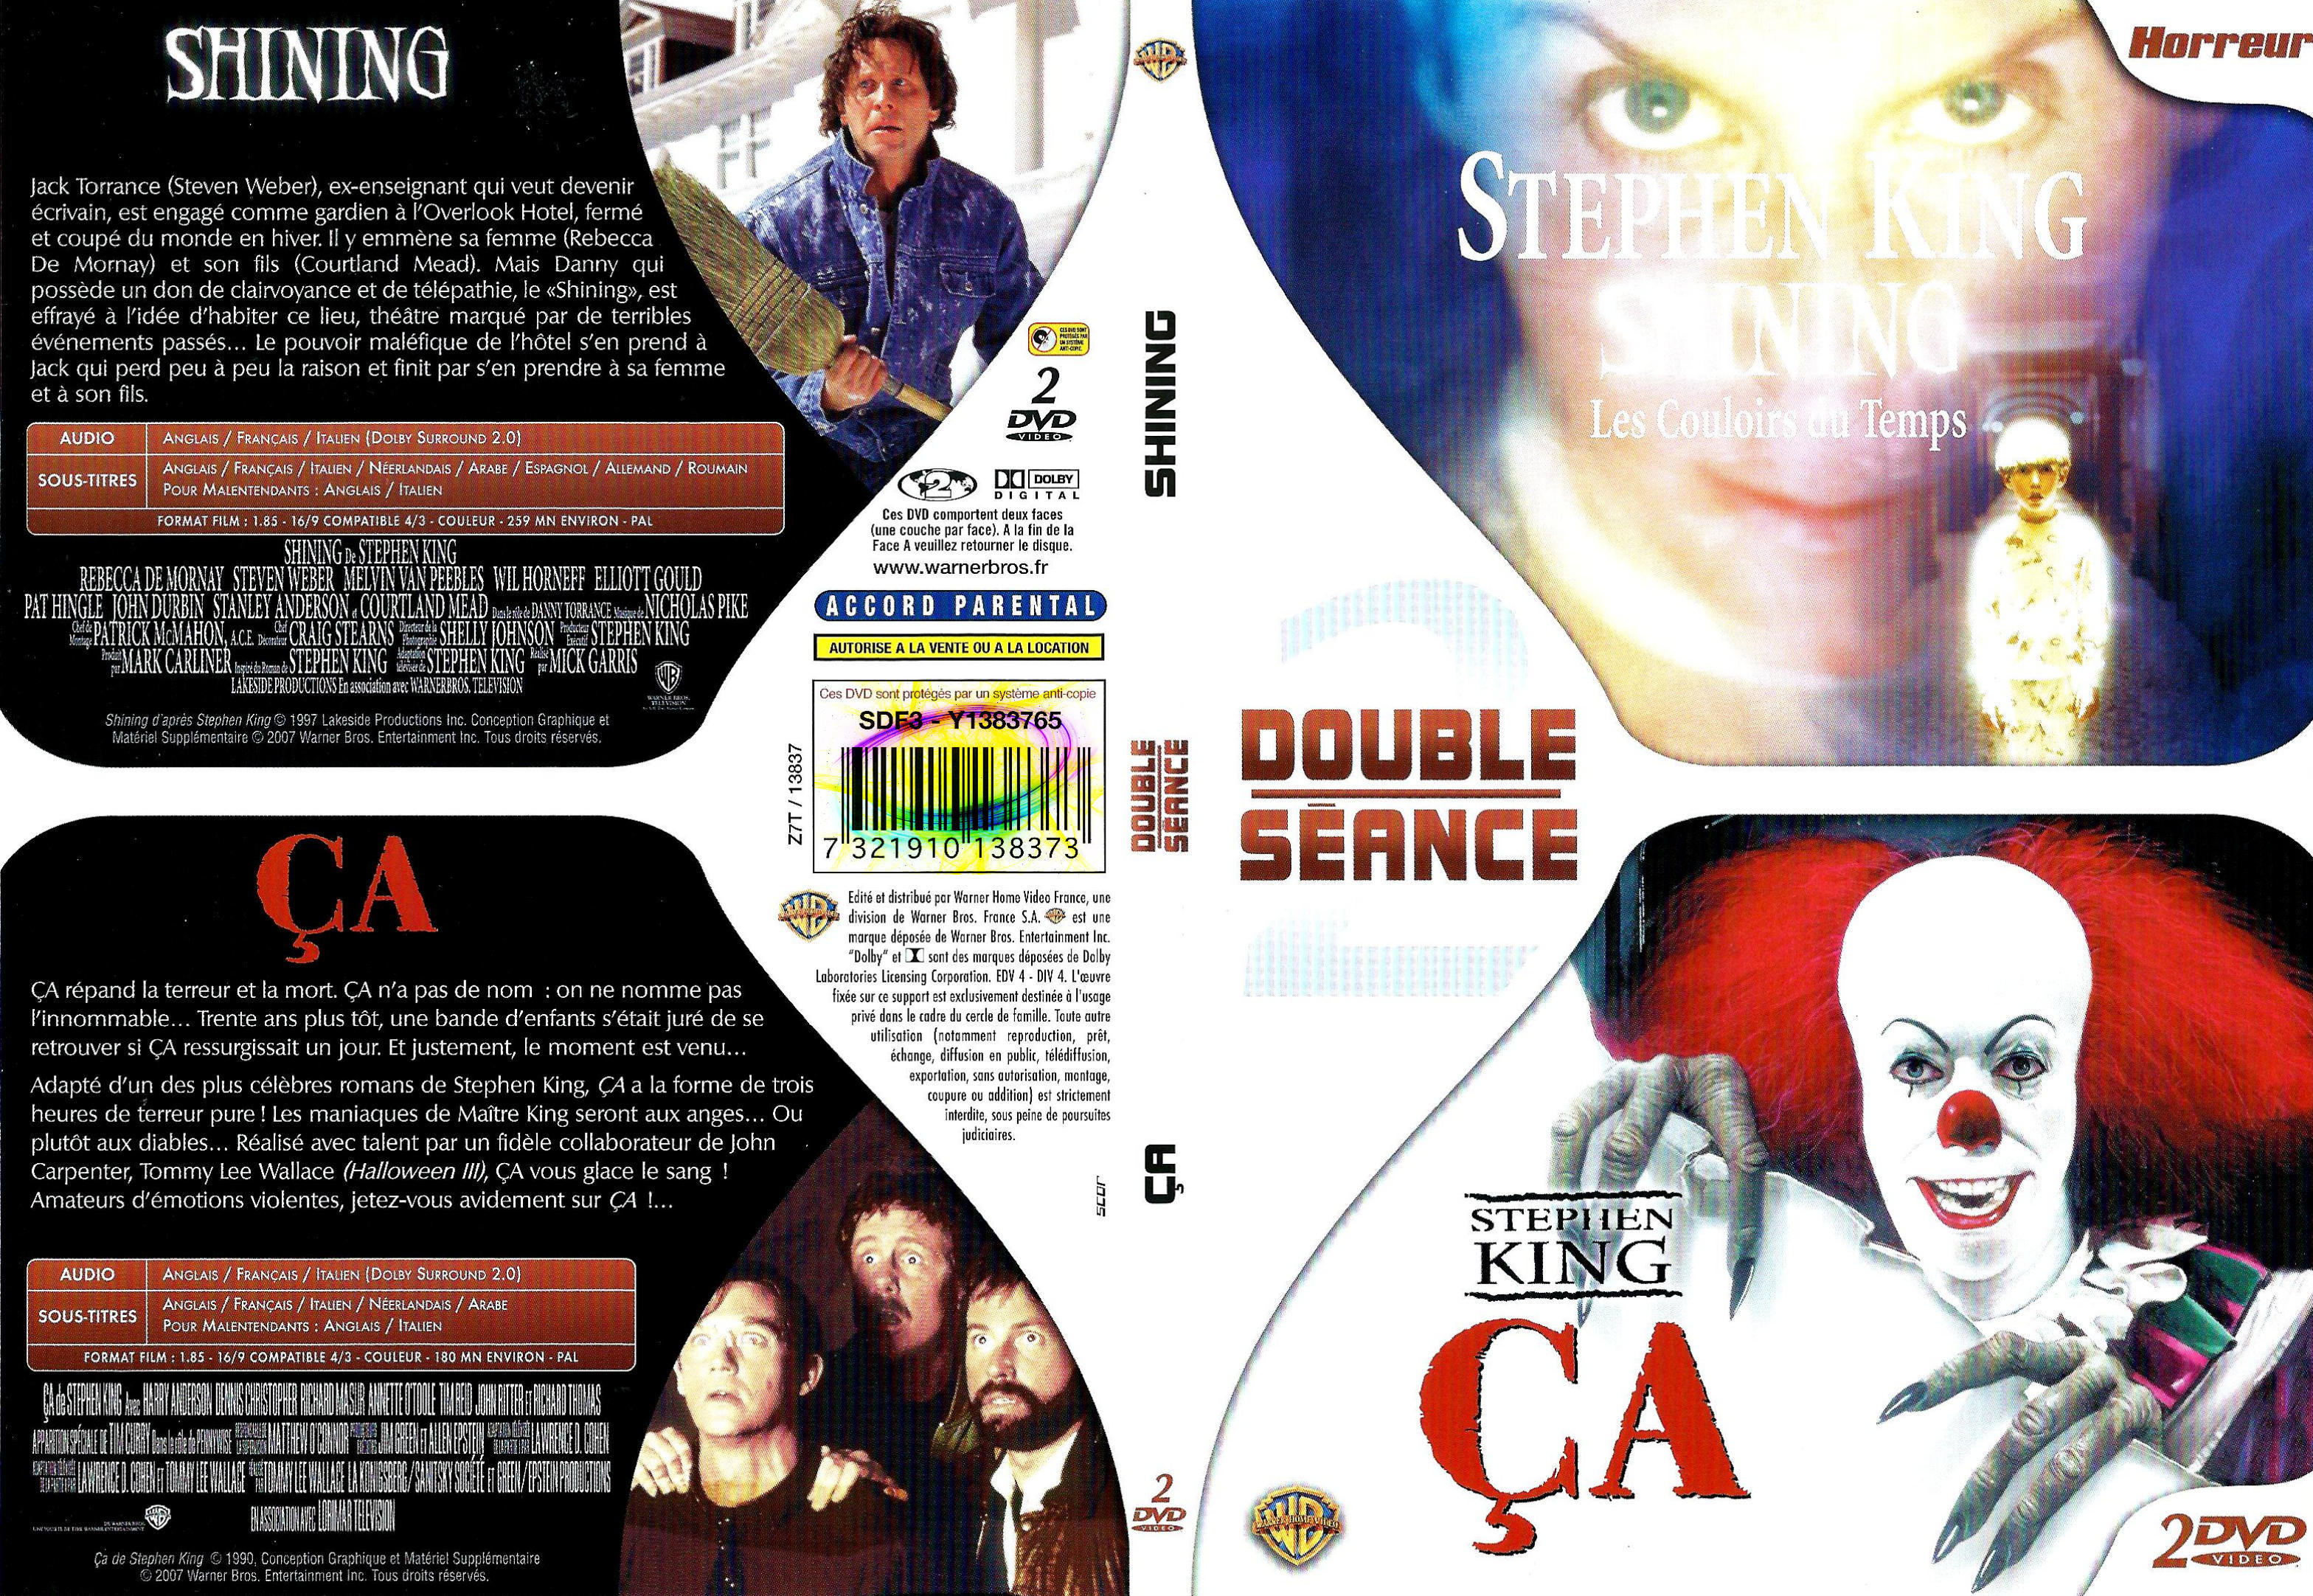 Jaquette DVD Shining + a